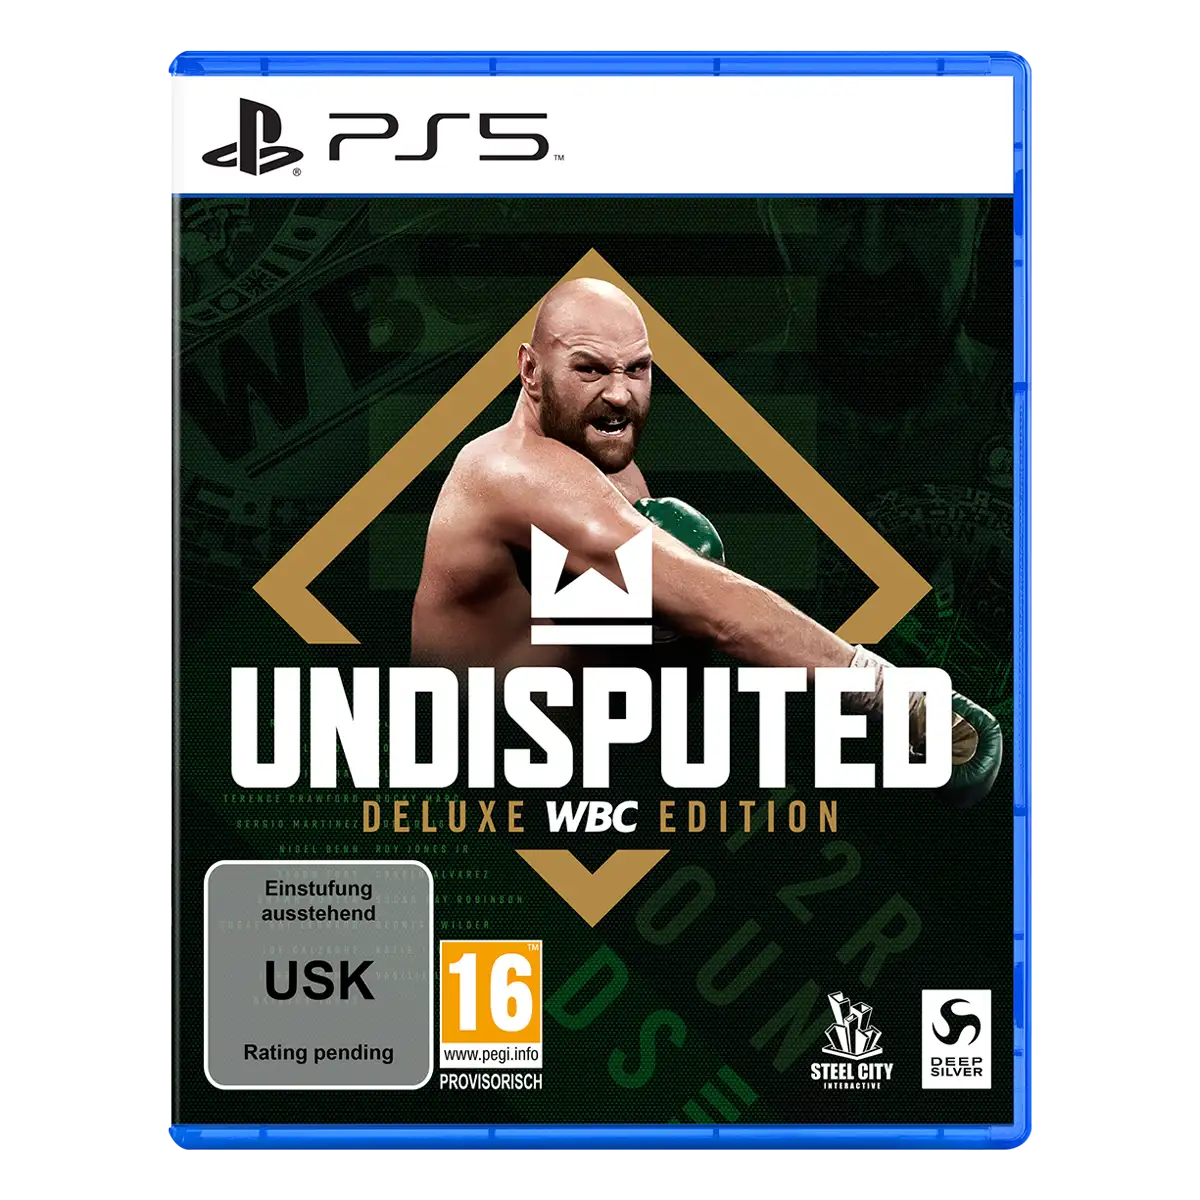 Undisputed Deluxe WBC Edition (PS5) Image 2